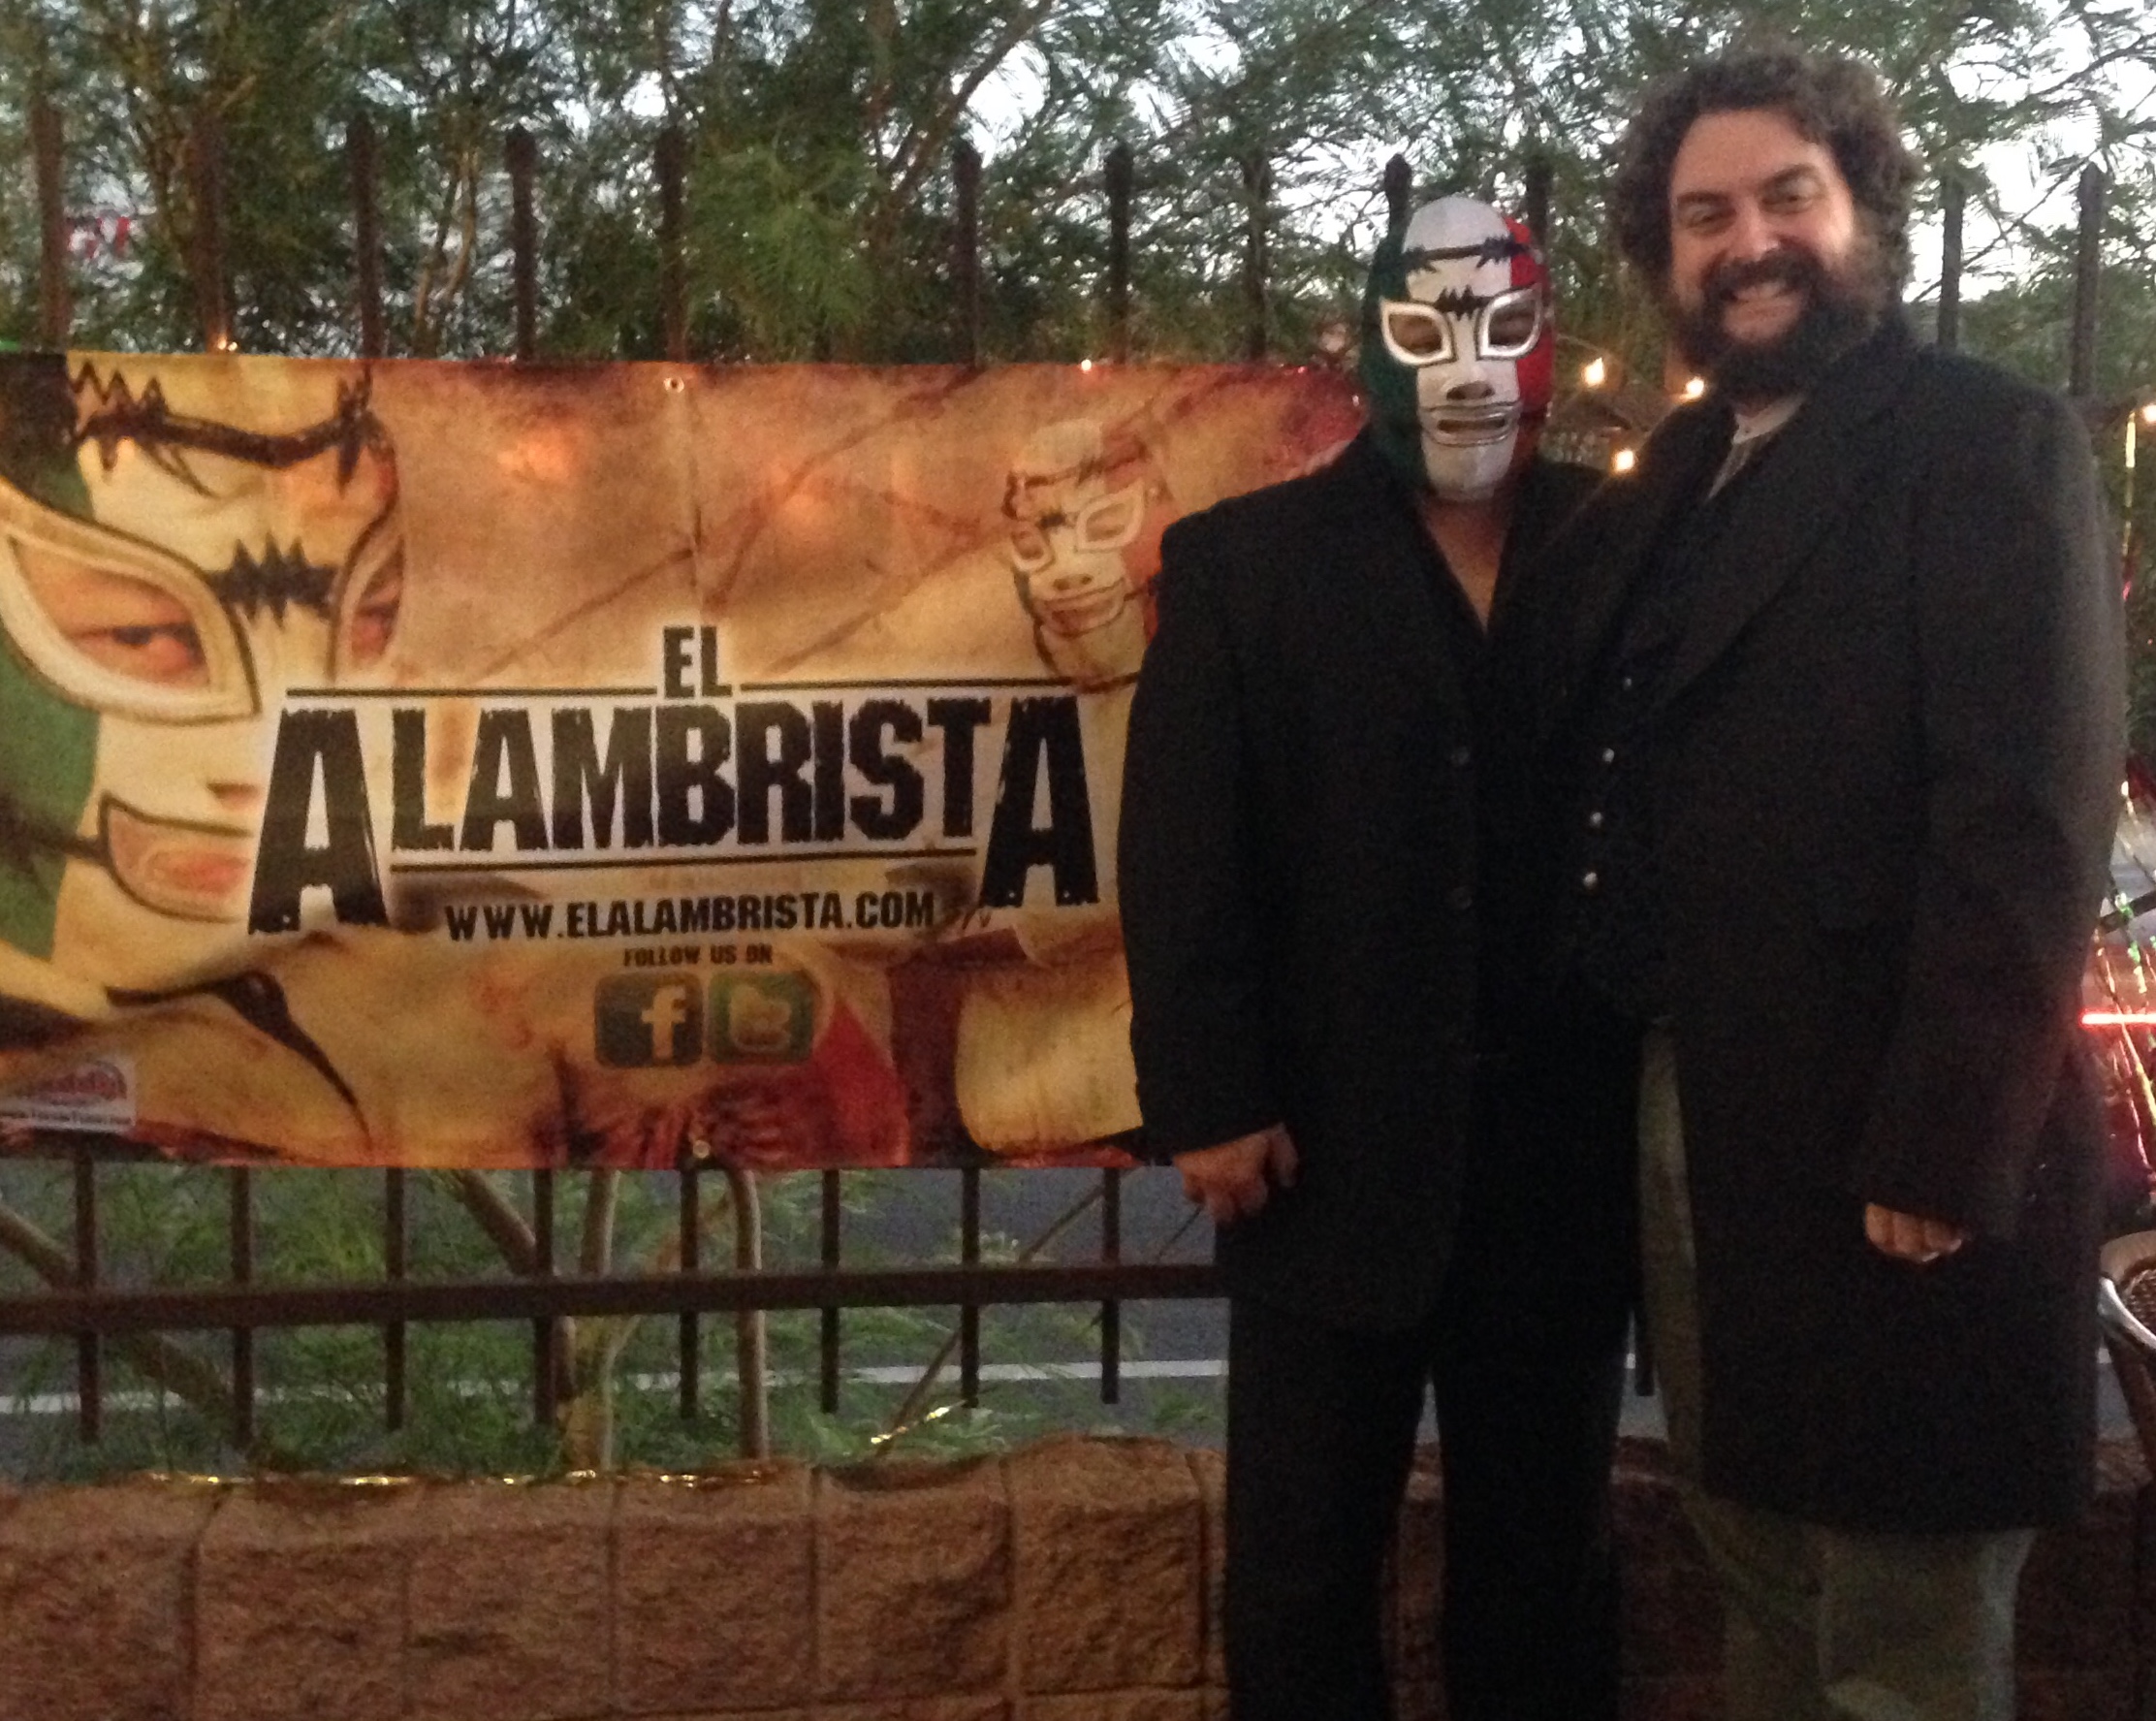 The Lowpriest with Fausto Olmos at the El Alambrista premiere 11 October 2014.